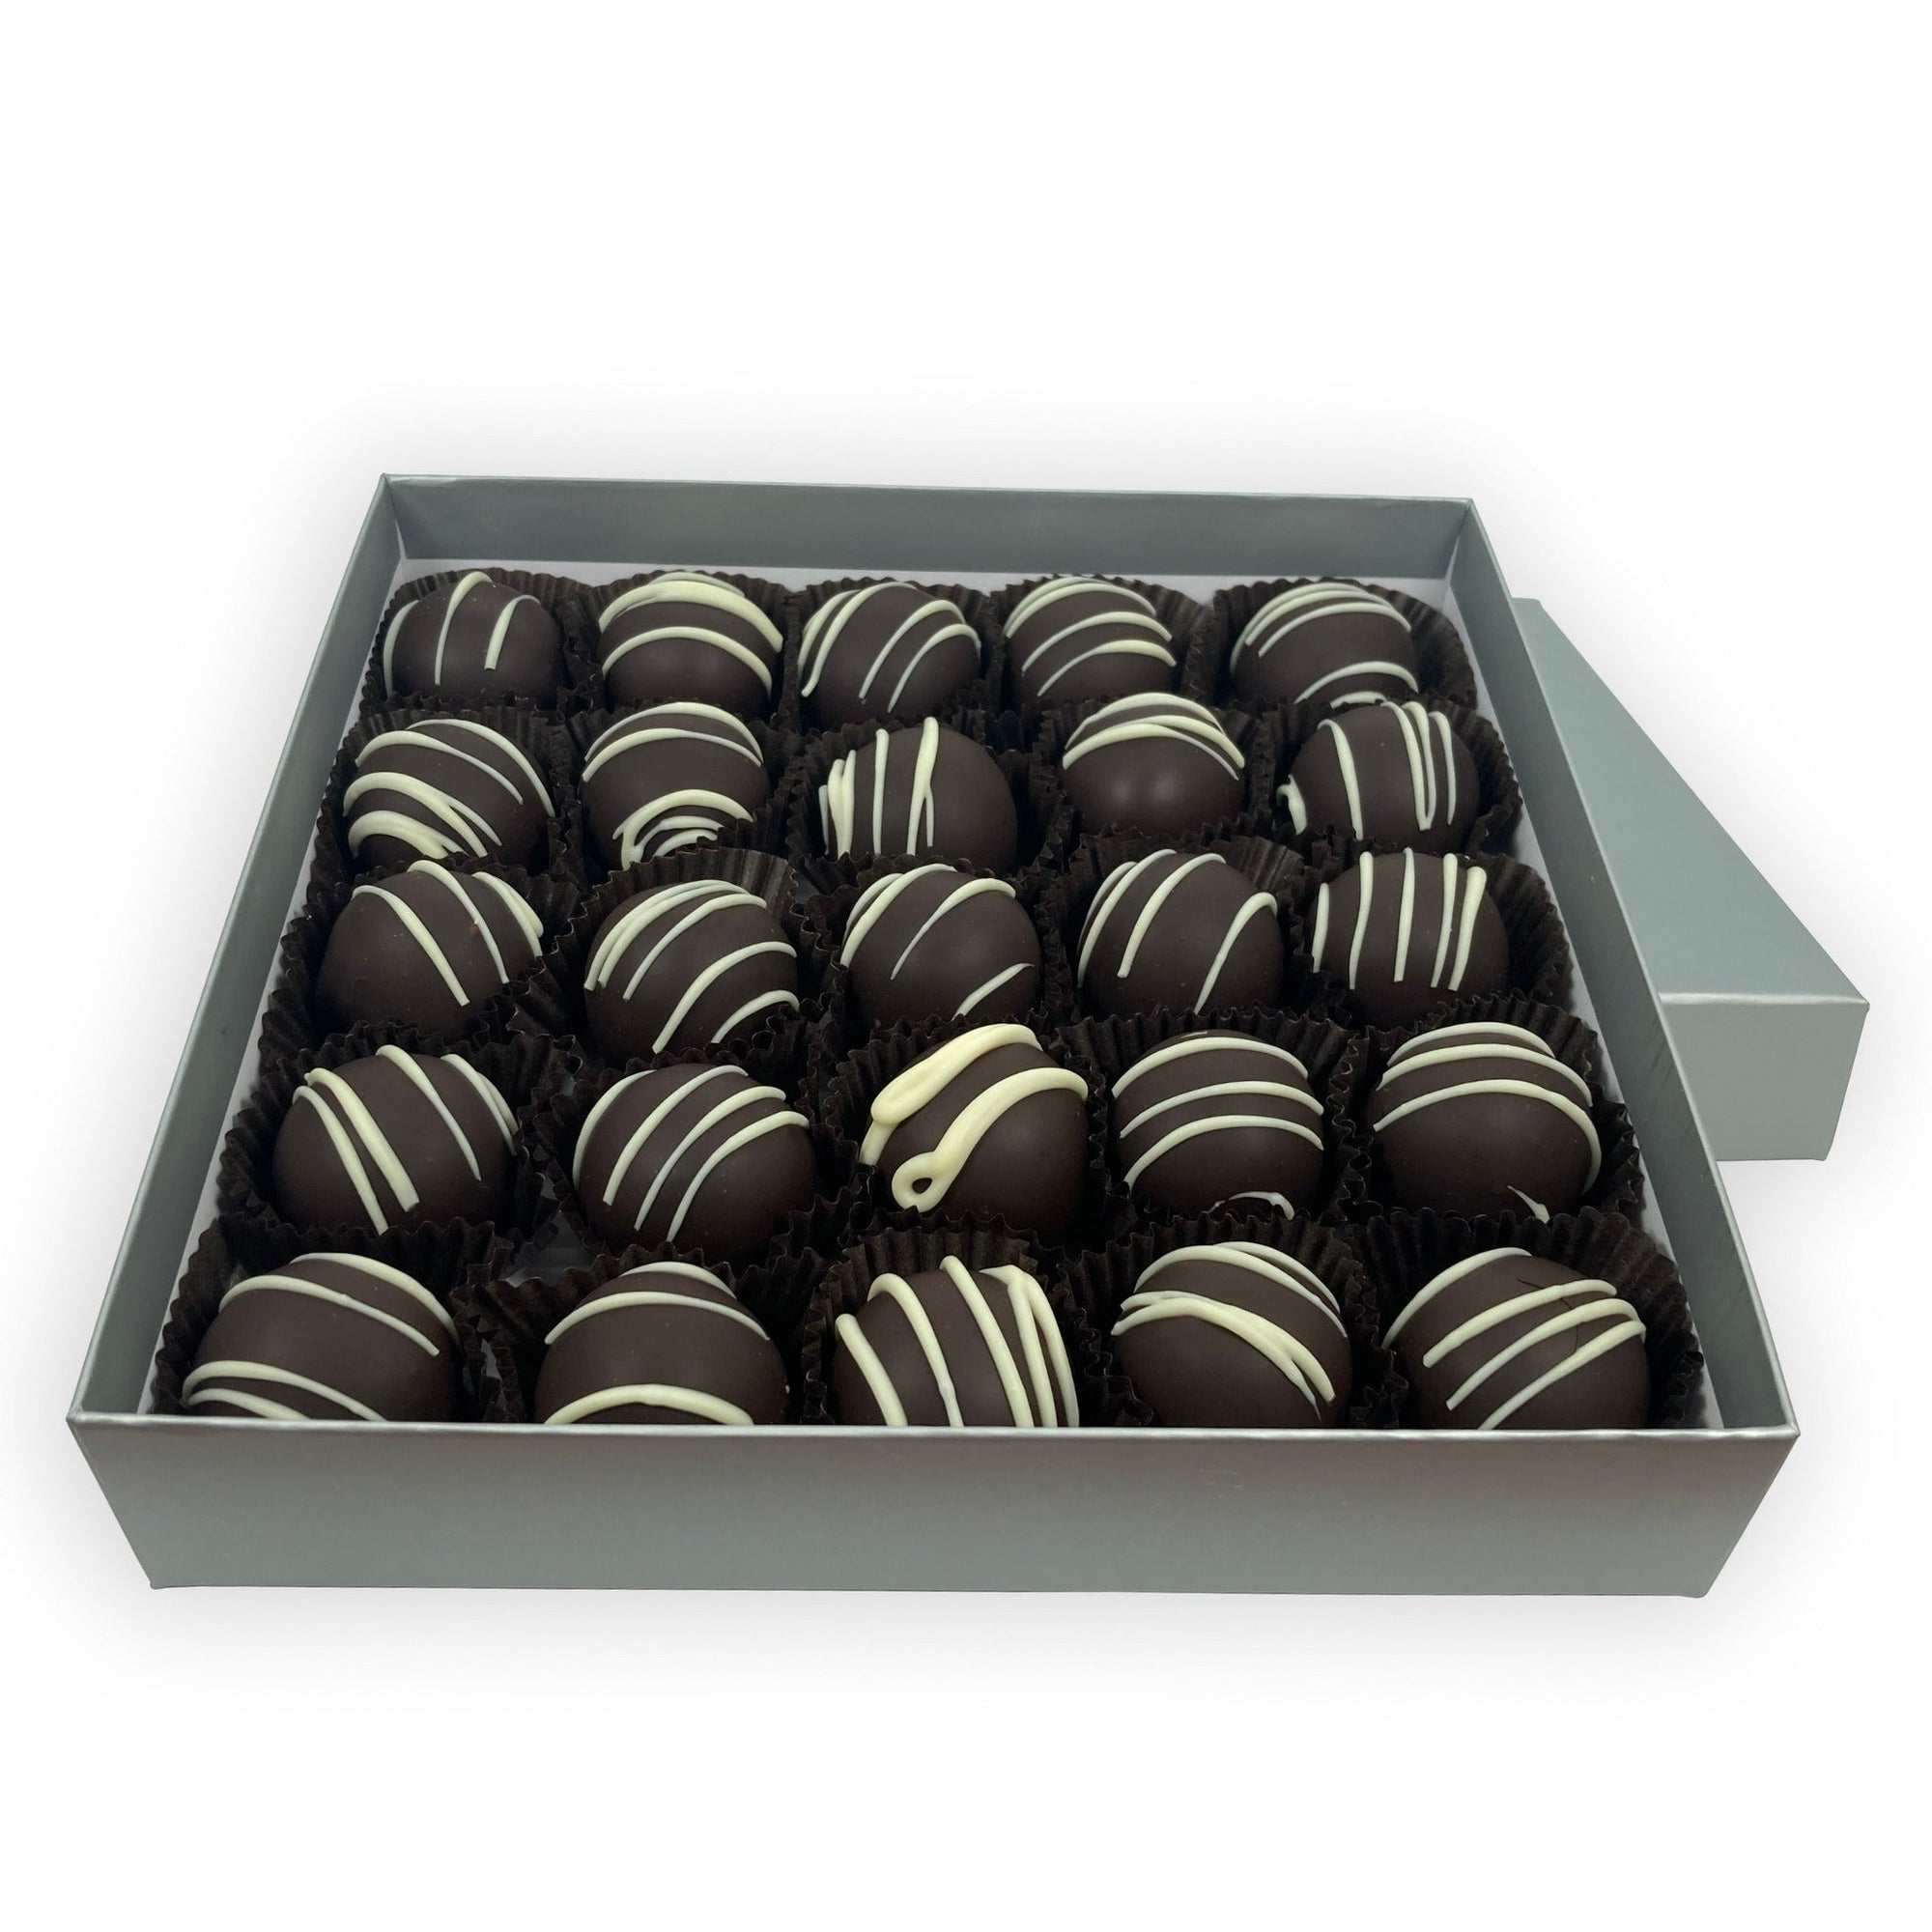 Dilettante Chocolates L'Orange Truffles coated with dark chocolate and embellished with white chocolate in a 25-piece bulk box